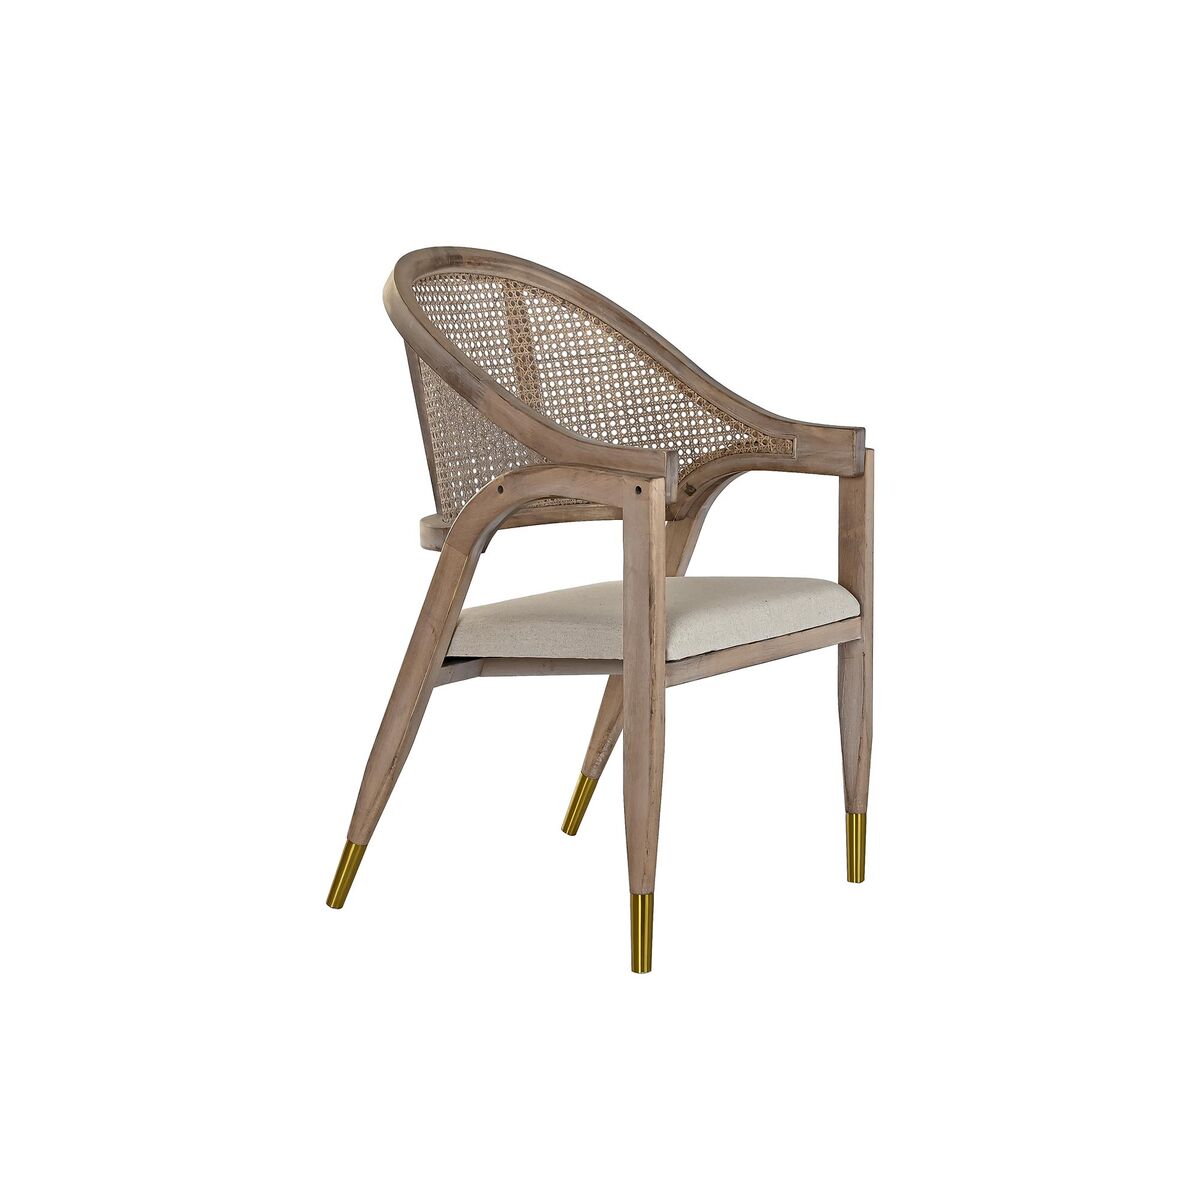 Chair with Armrests DKD Home Decor Beige Fir Polyester (59 x 55 x 88 cm)